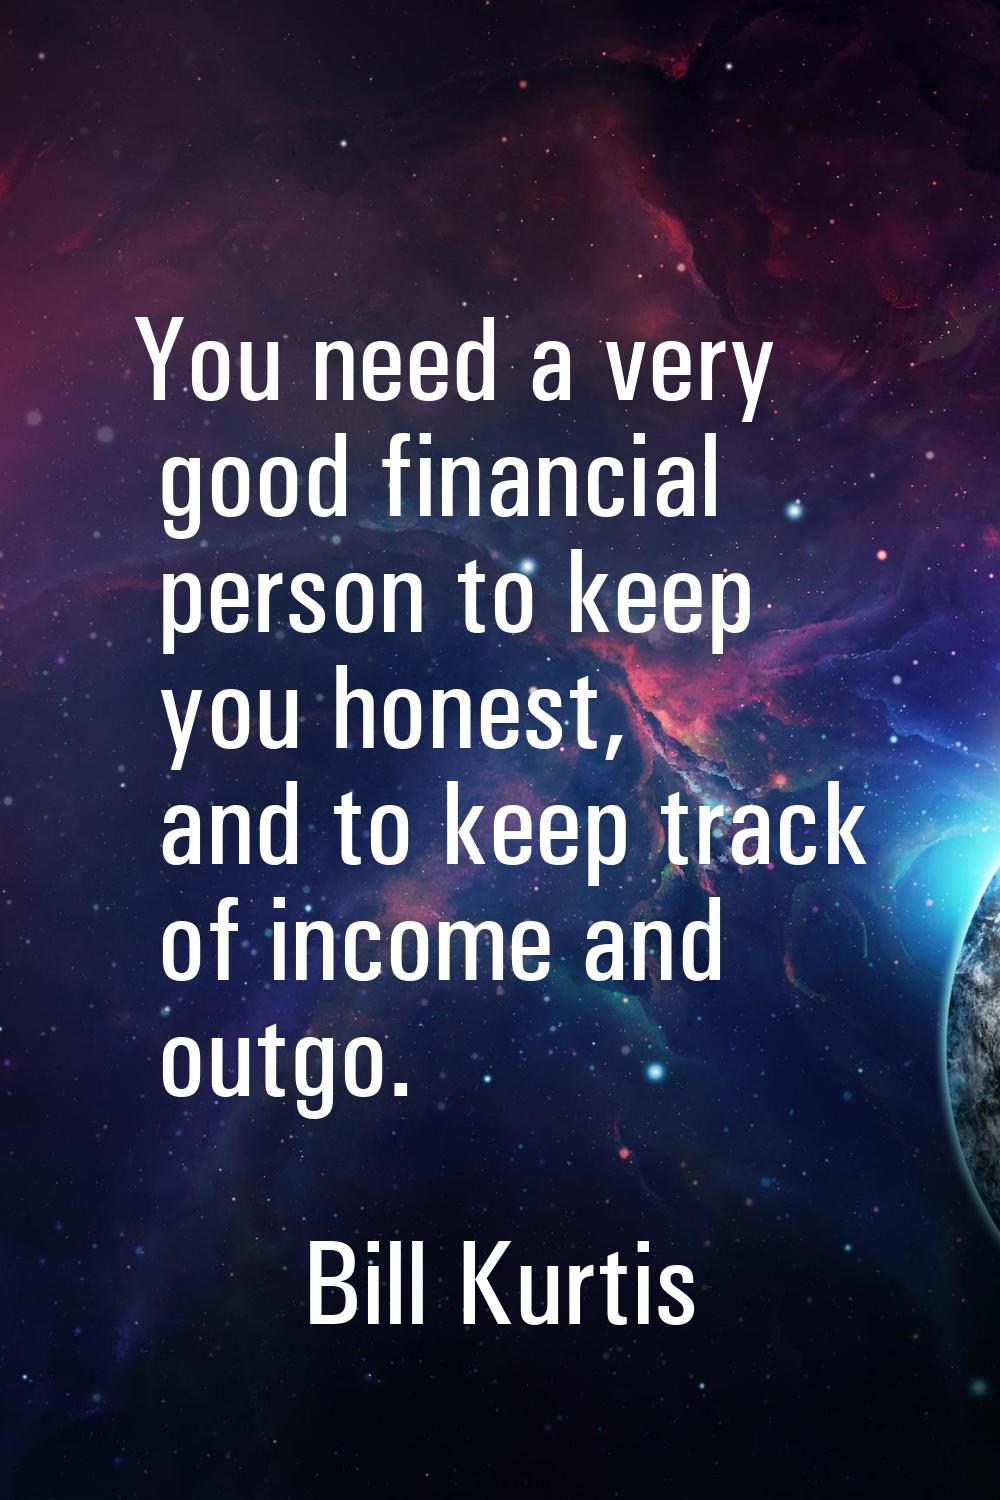 You need a very good financial person to keep you honest, and to keep track of income and outgo.